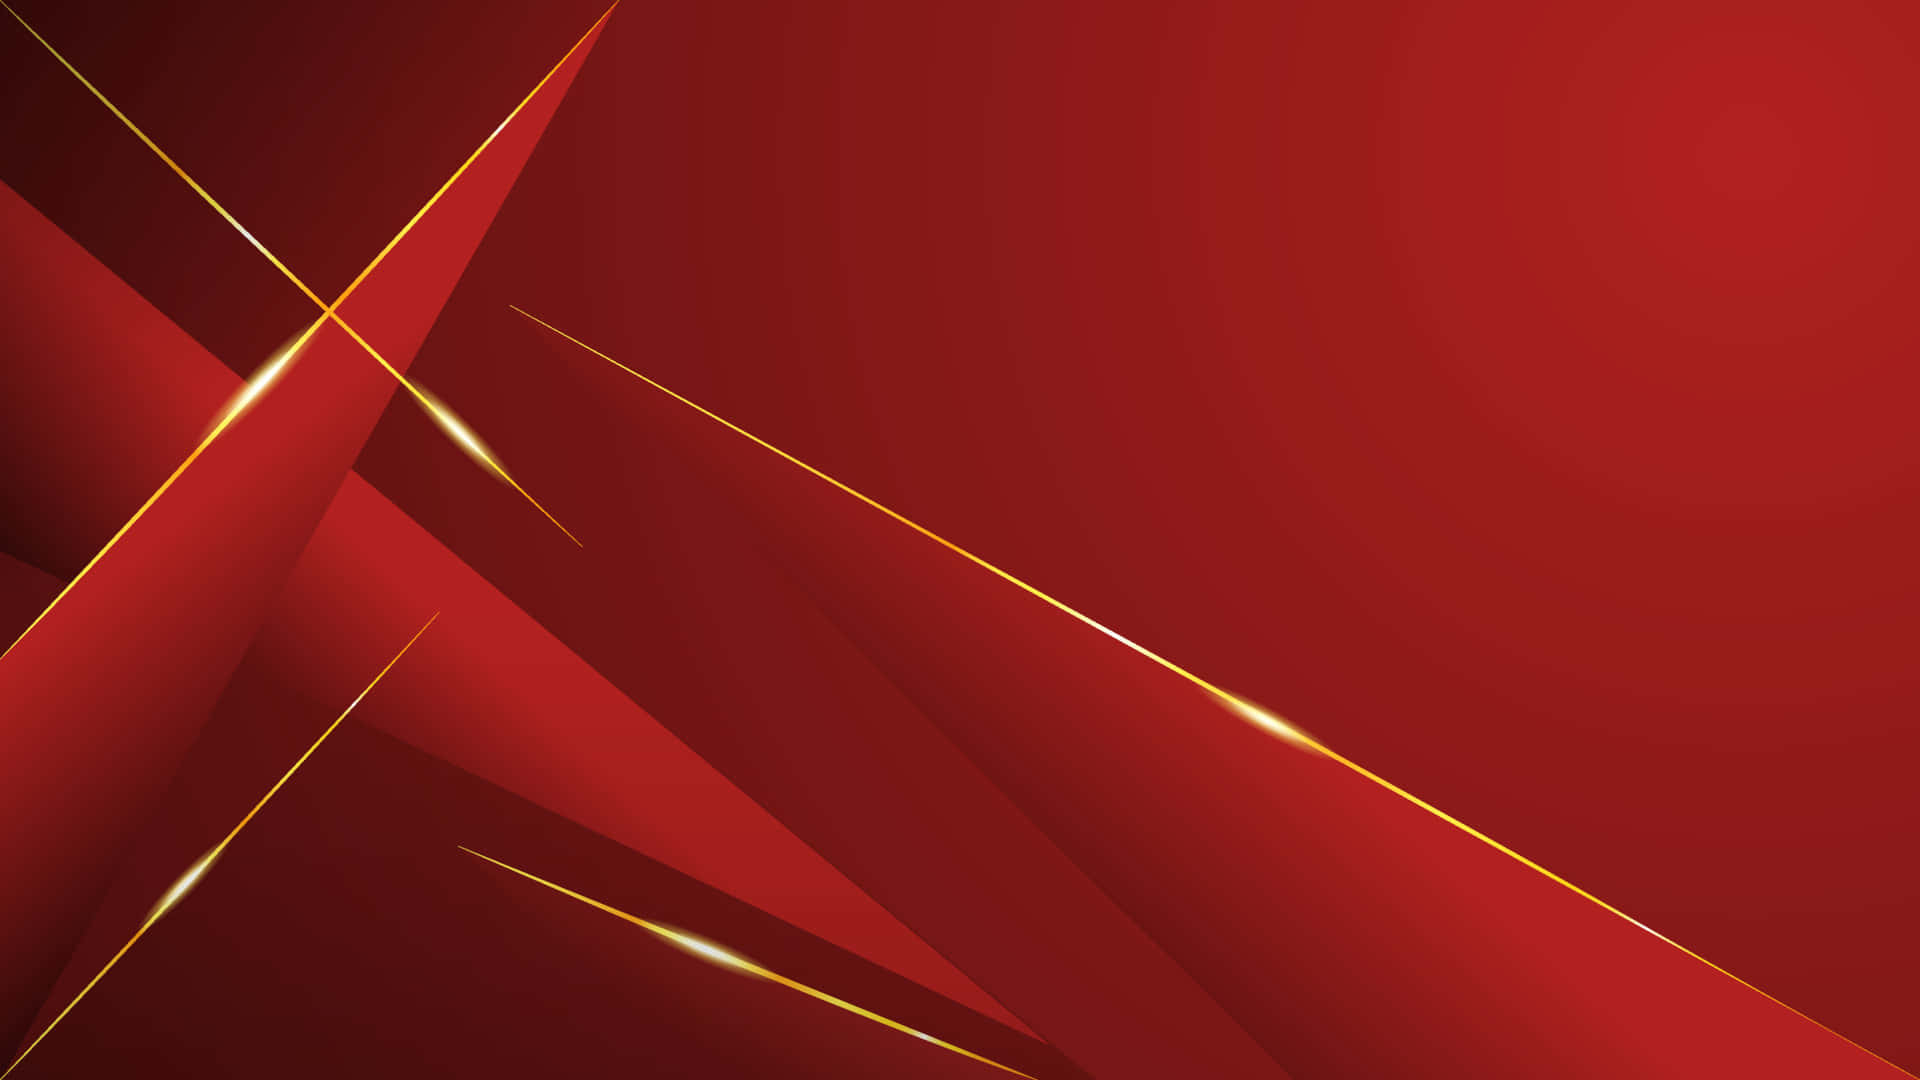 An elegantly designed red and gold background